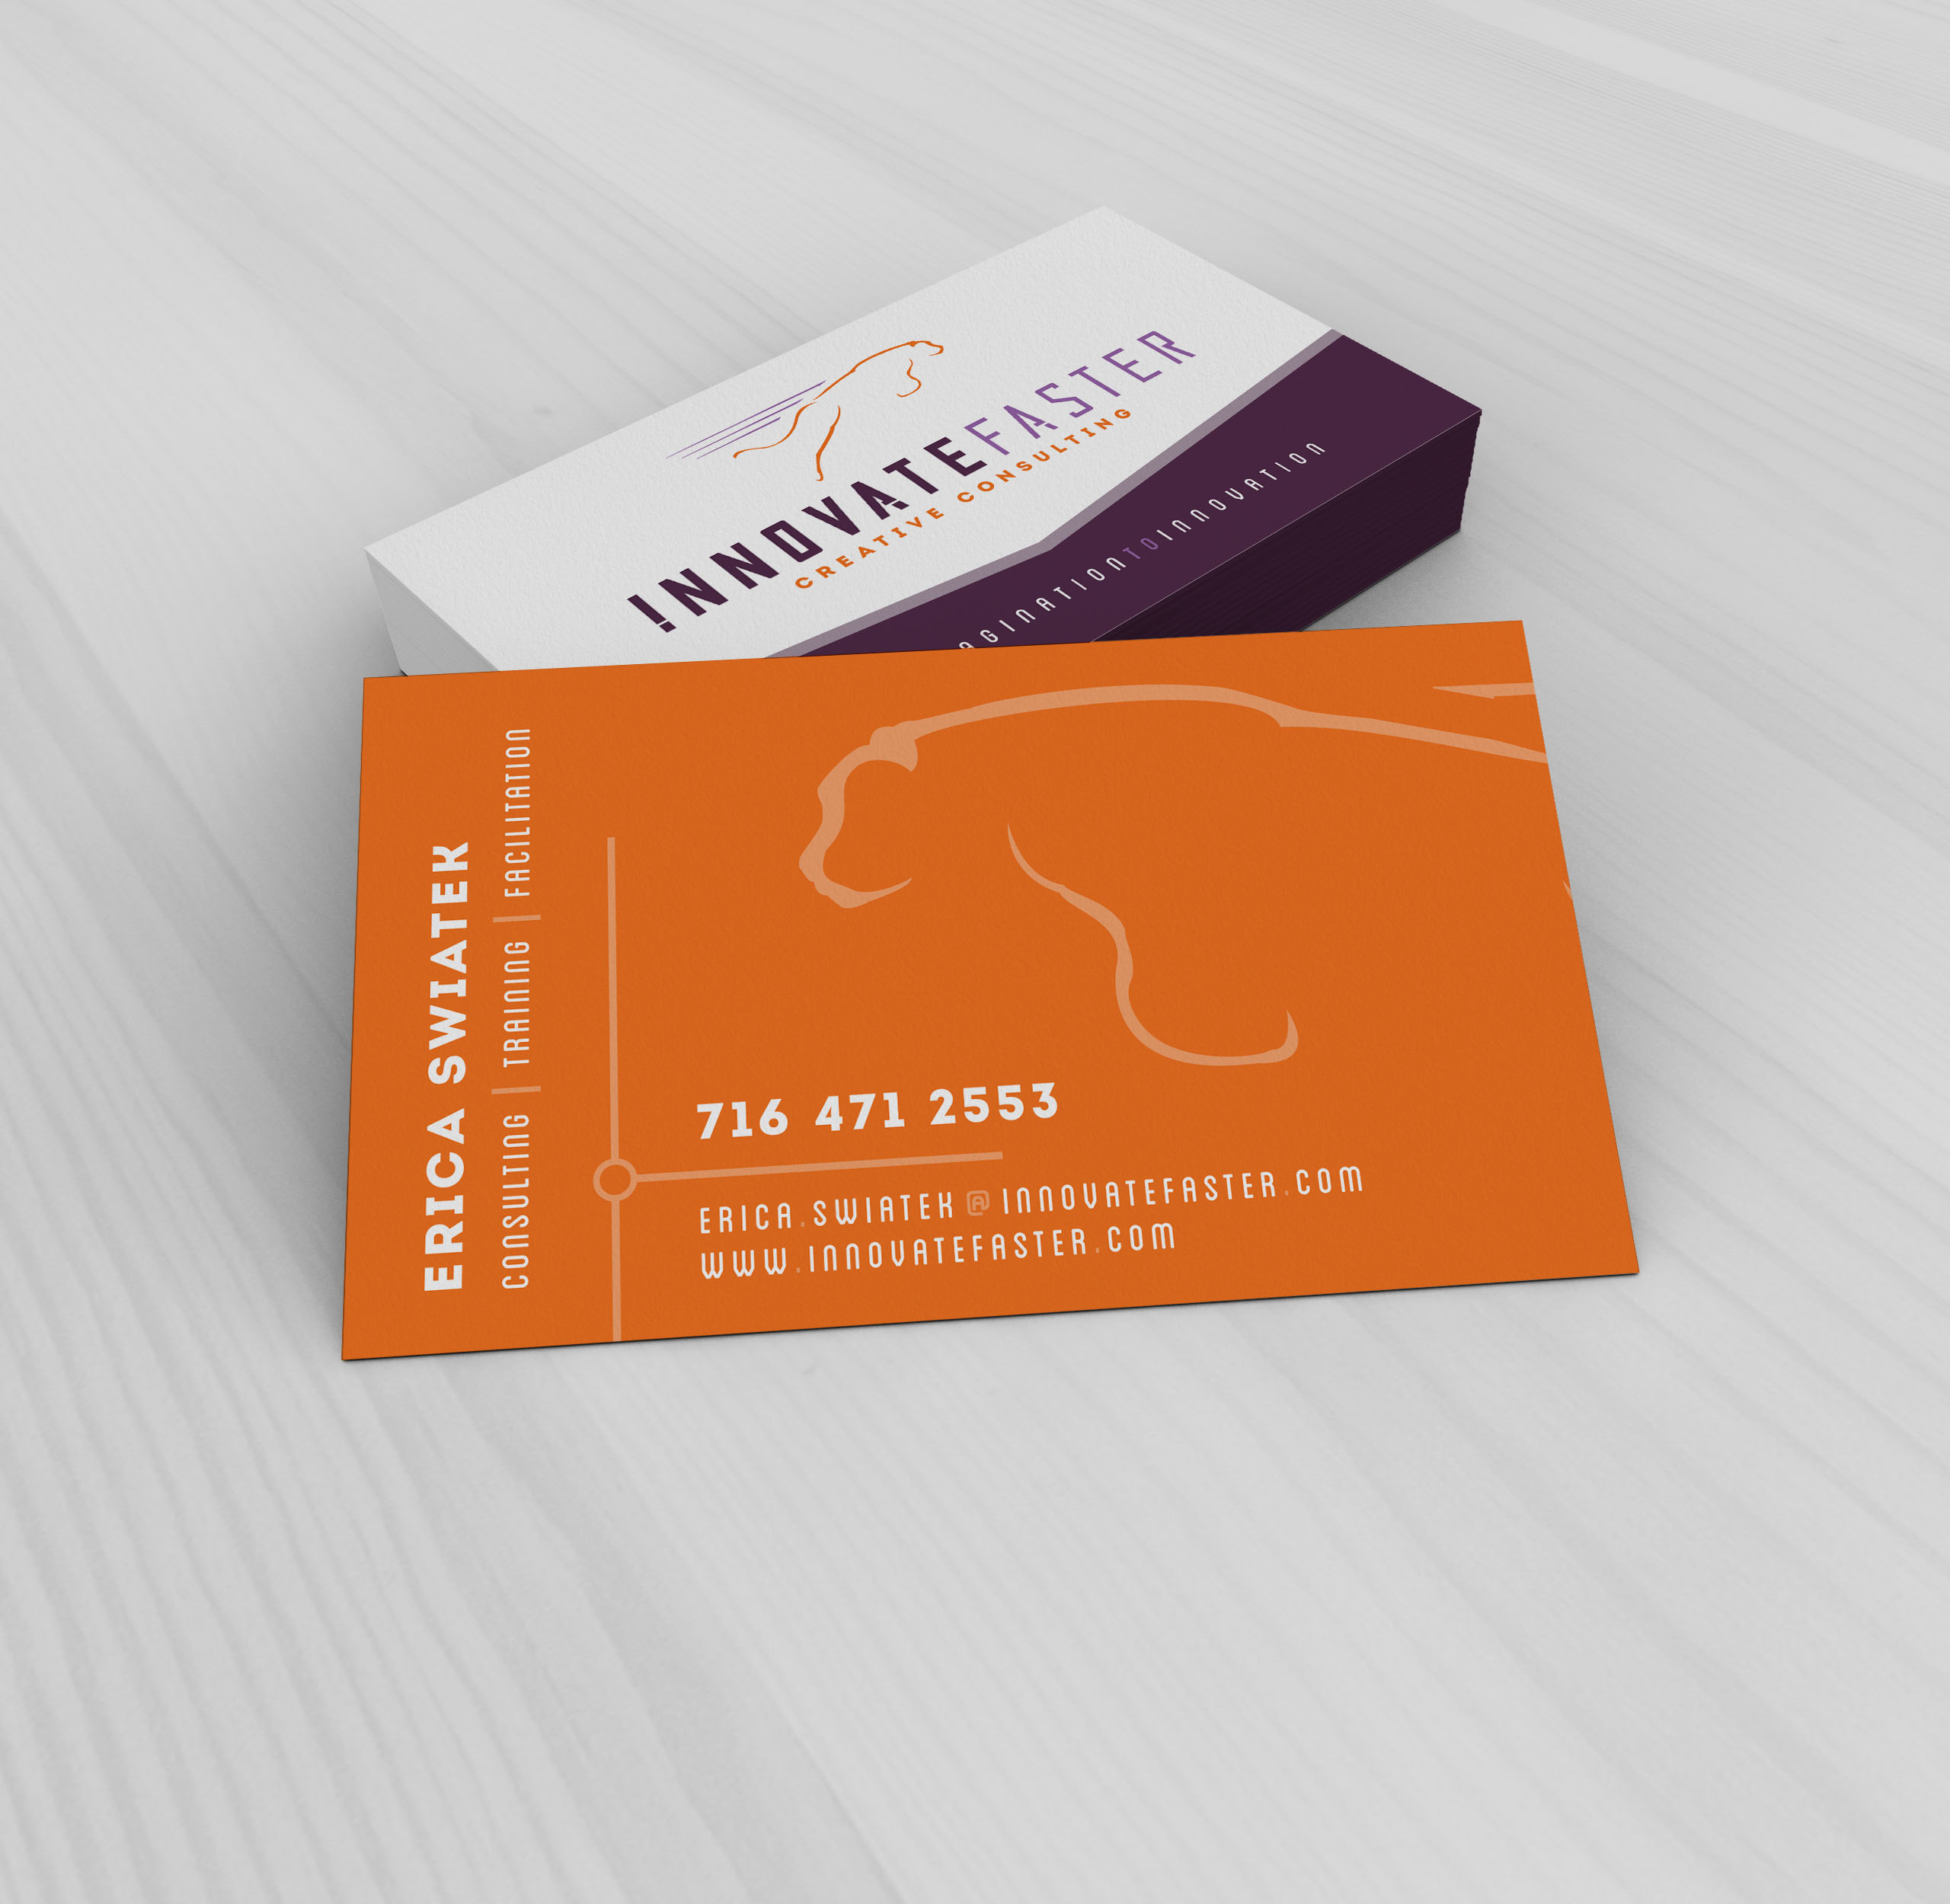 Innovate Faster Business Card